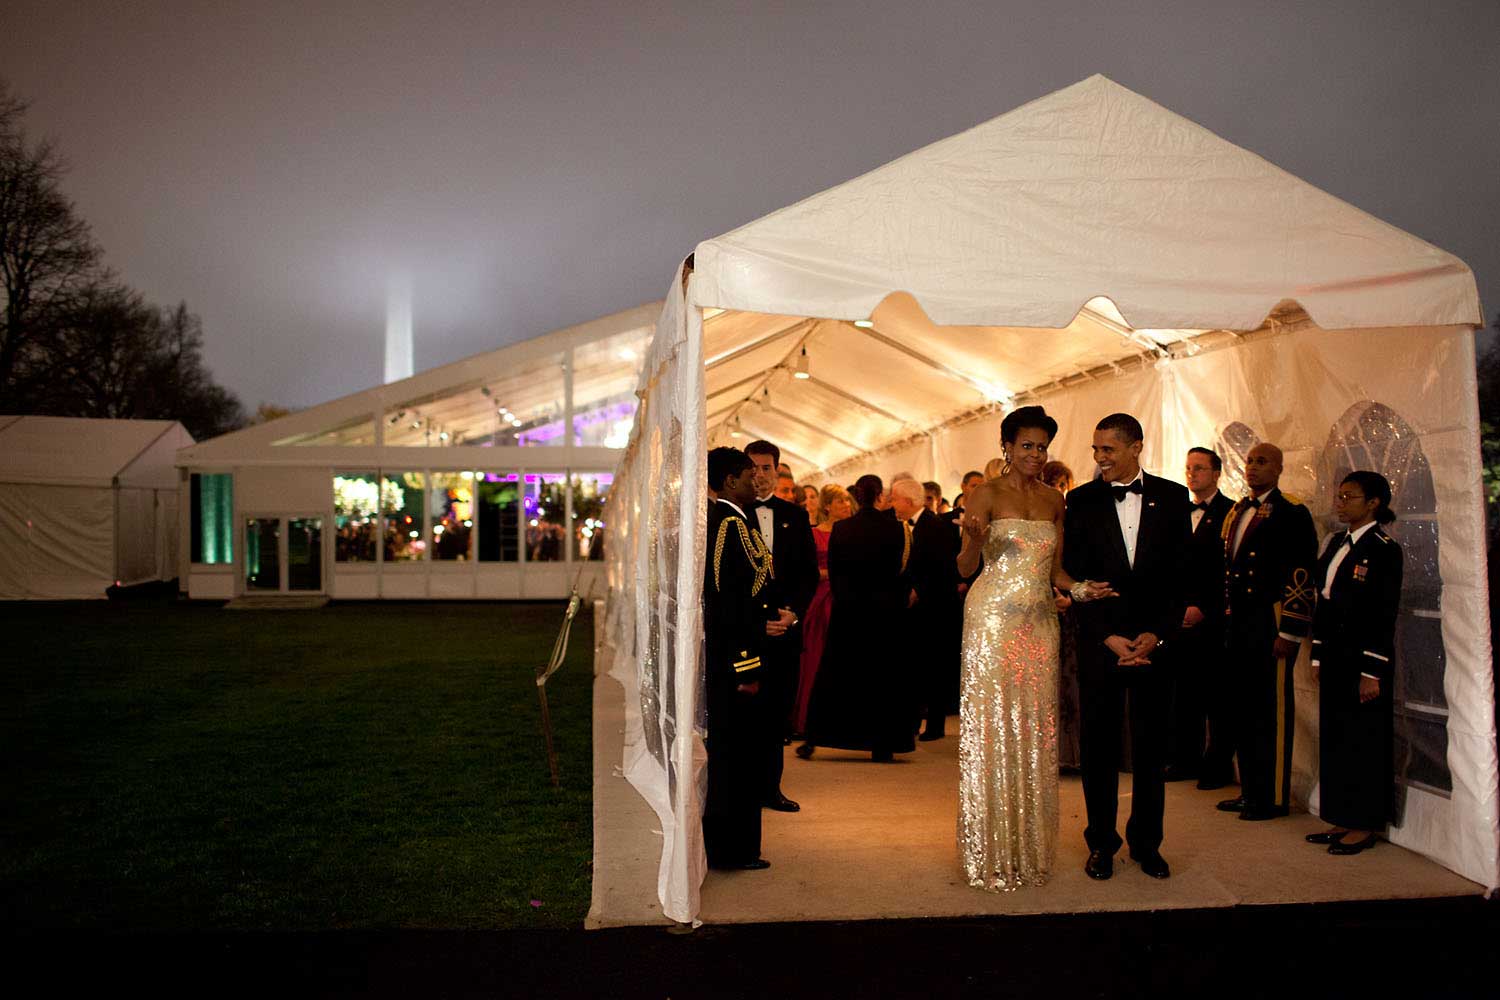 ÒThe President and First Lady wait for Indian Prime Minister SinghÕs motorcade to depart the White House at the conclusion of the first official state dinner for the Obama administration, Nov. 24, 2009. The dinner was held in a tent on the South Lawn. The mist and fog made for an interesting scene, even obscuring the top of the Washington Monument in the background.Ó